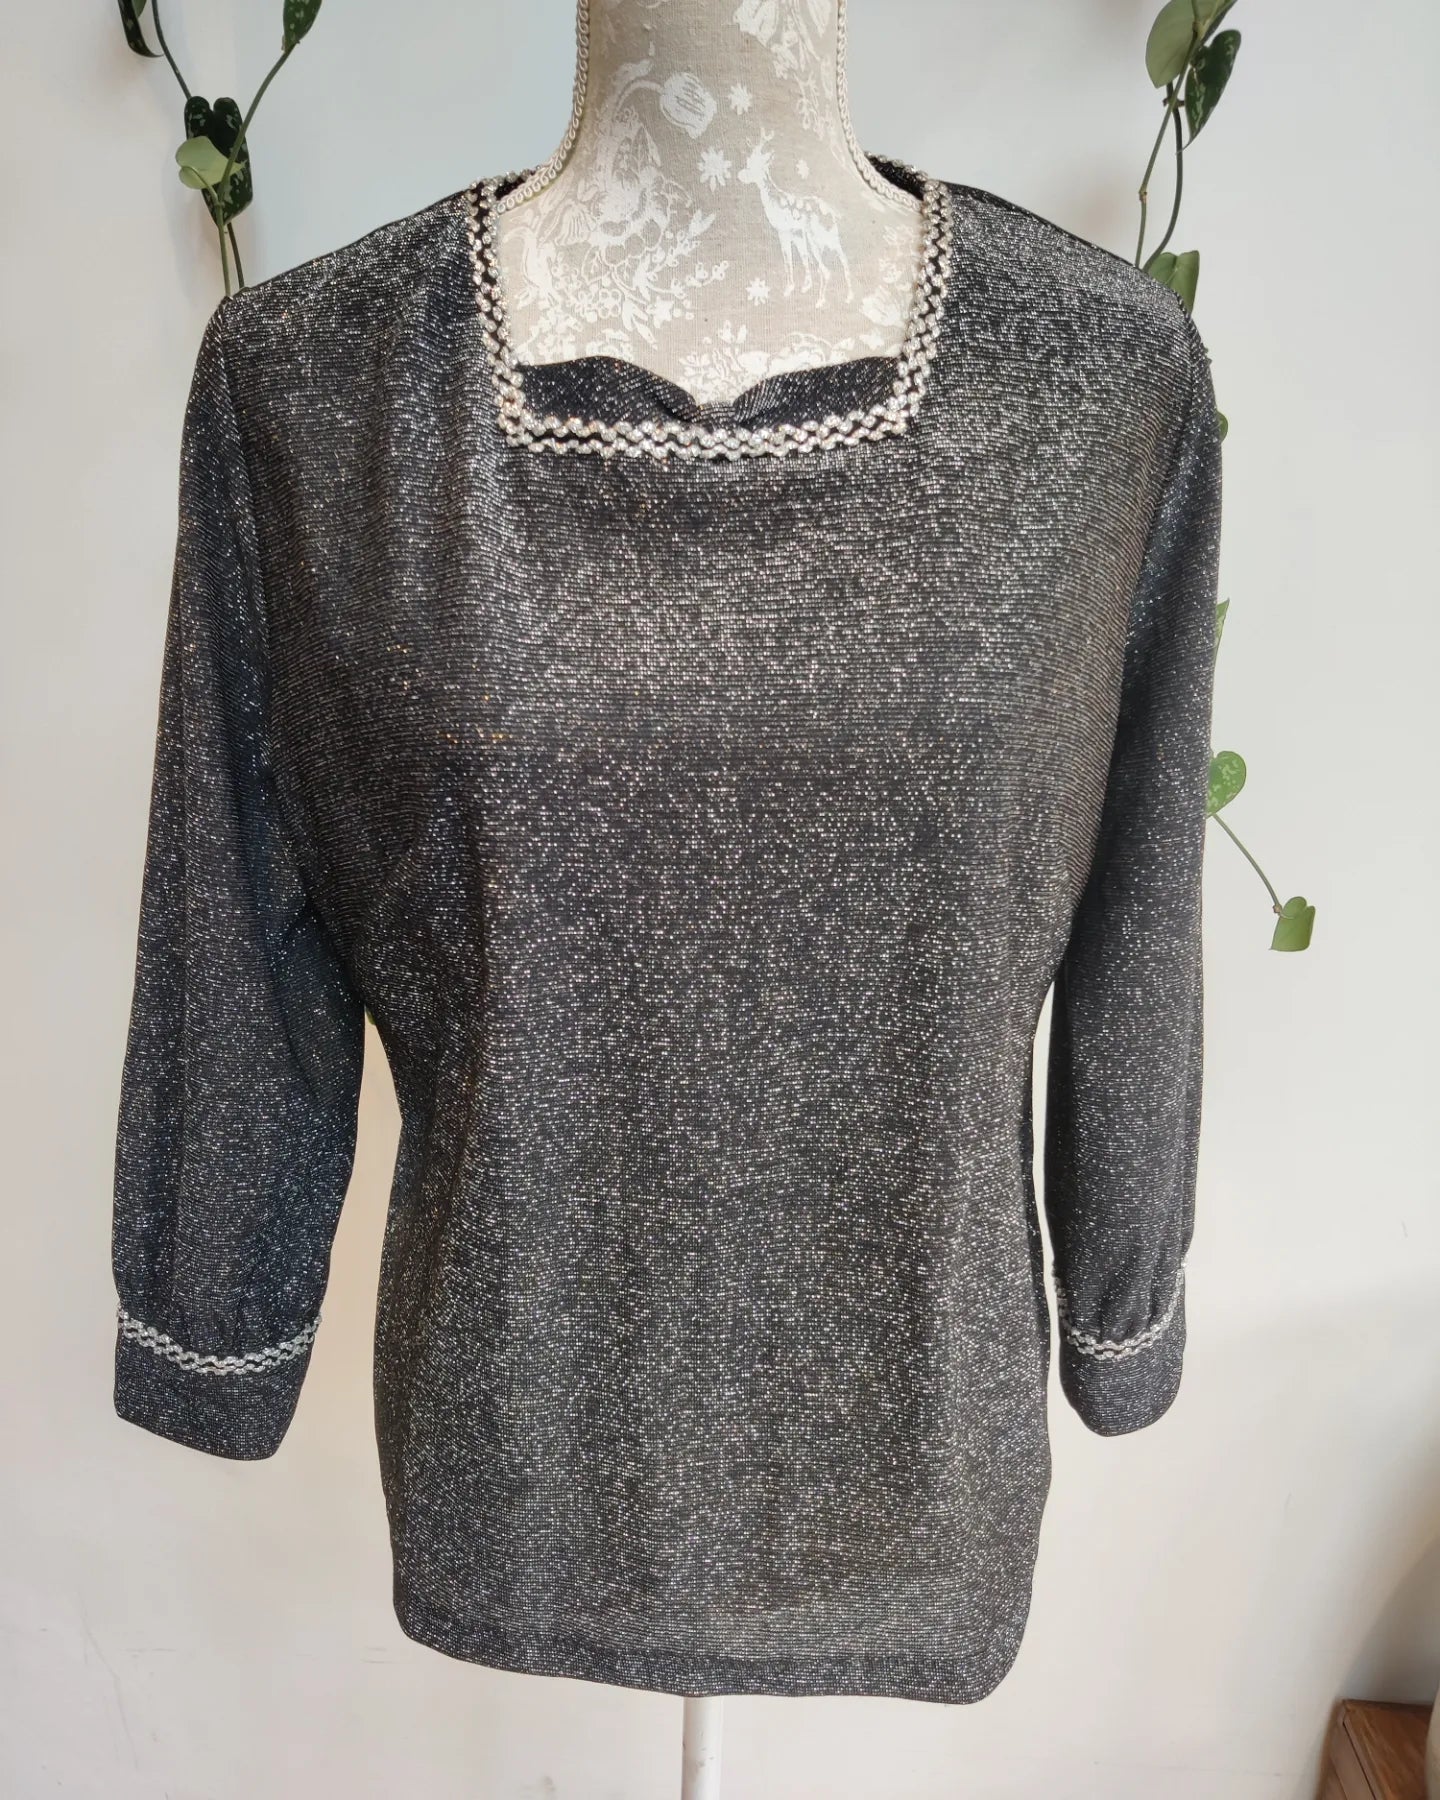 Sparkly silver lurex top in a size 16.